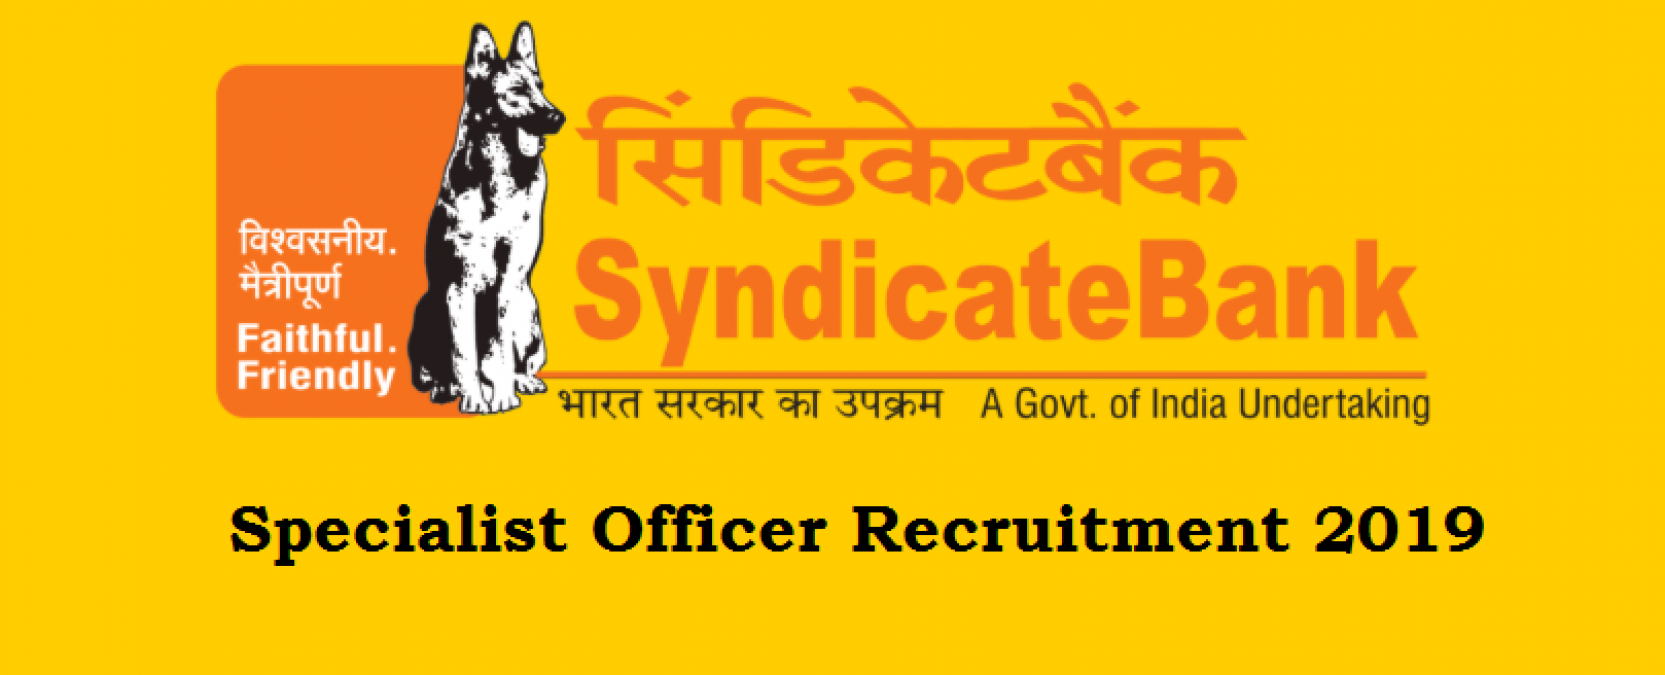 Syndicate Bank recruitment 2019: Apply for SO recruitment, check details here